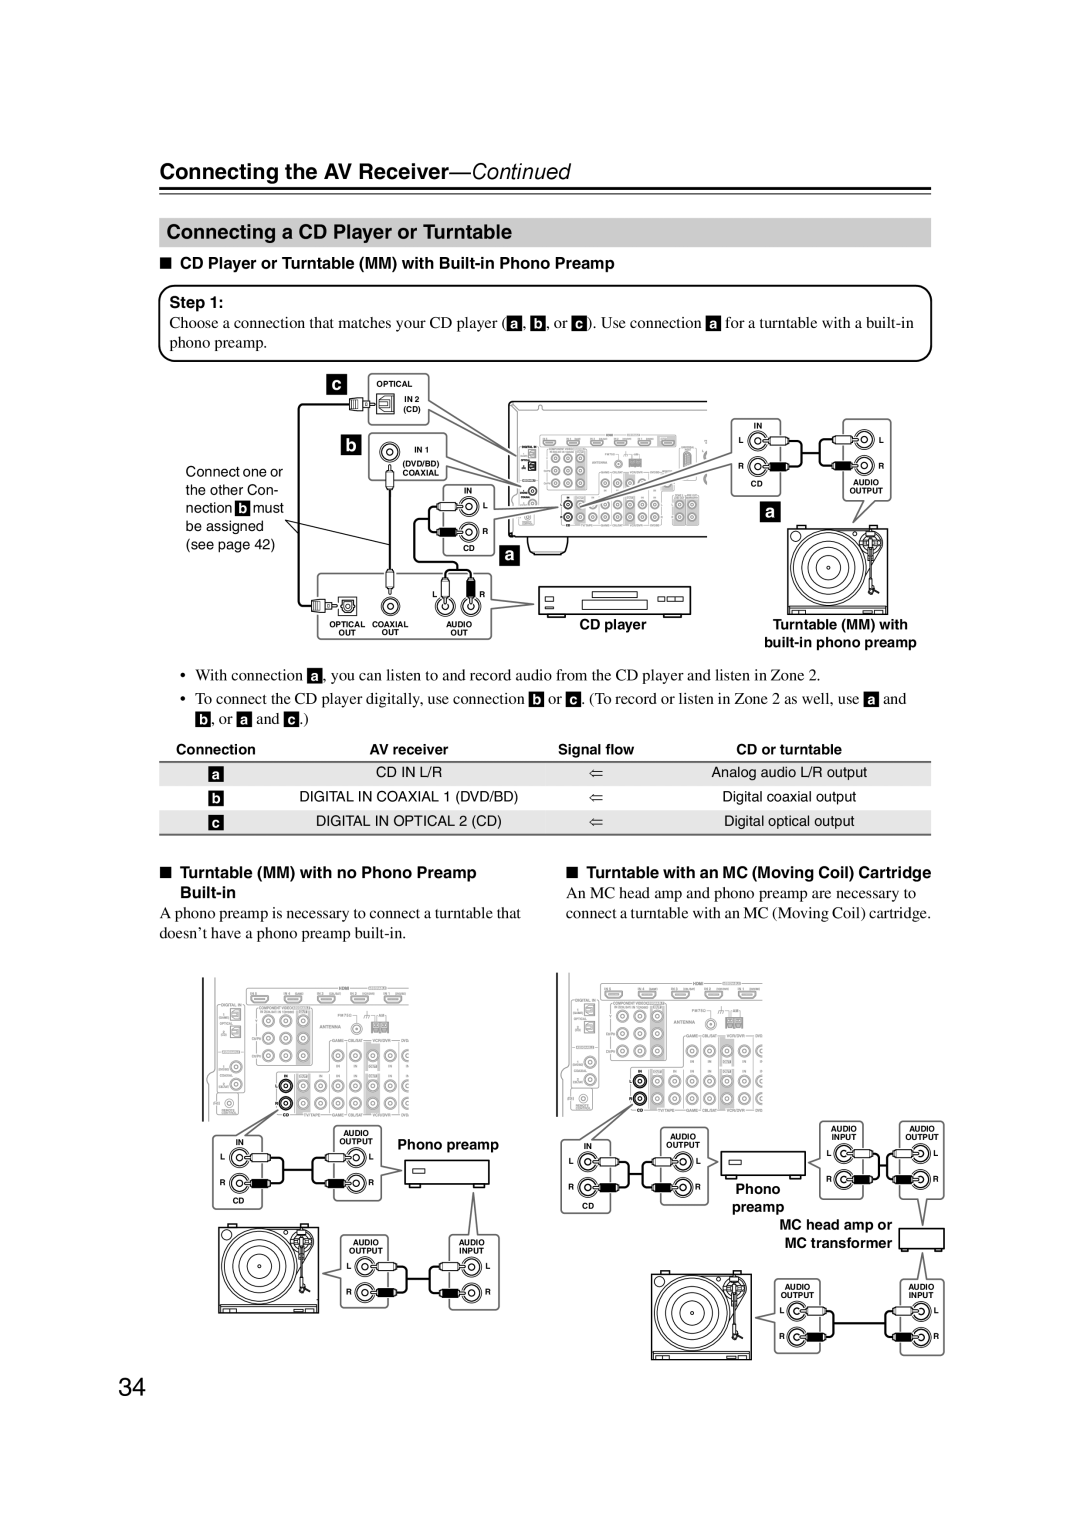 Onkyo SR607 instruction manual Connecting a CD Player or Turntable, Connecting the AV Receiver—Continued 